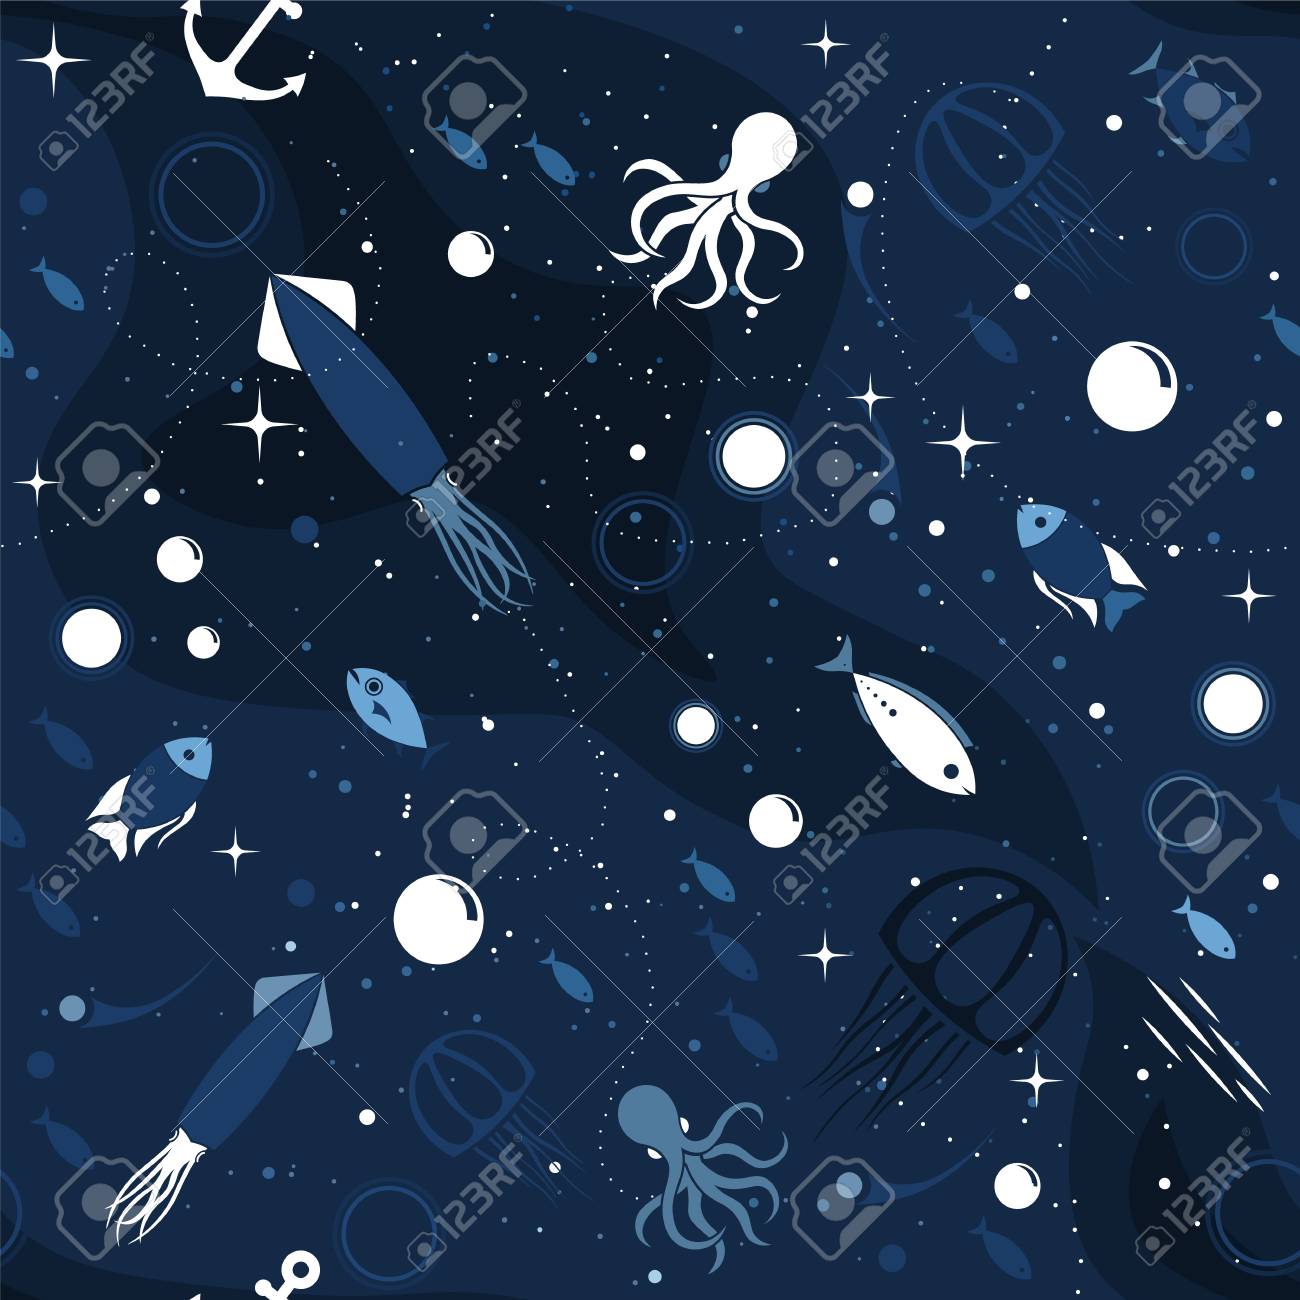 Sea Life Background With Fish Medusa Octopus Squid And Bubbles